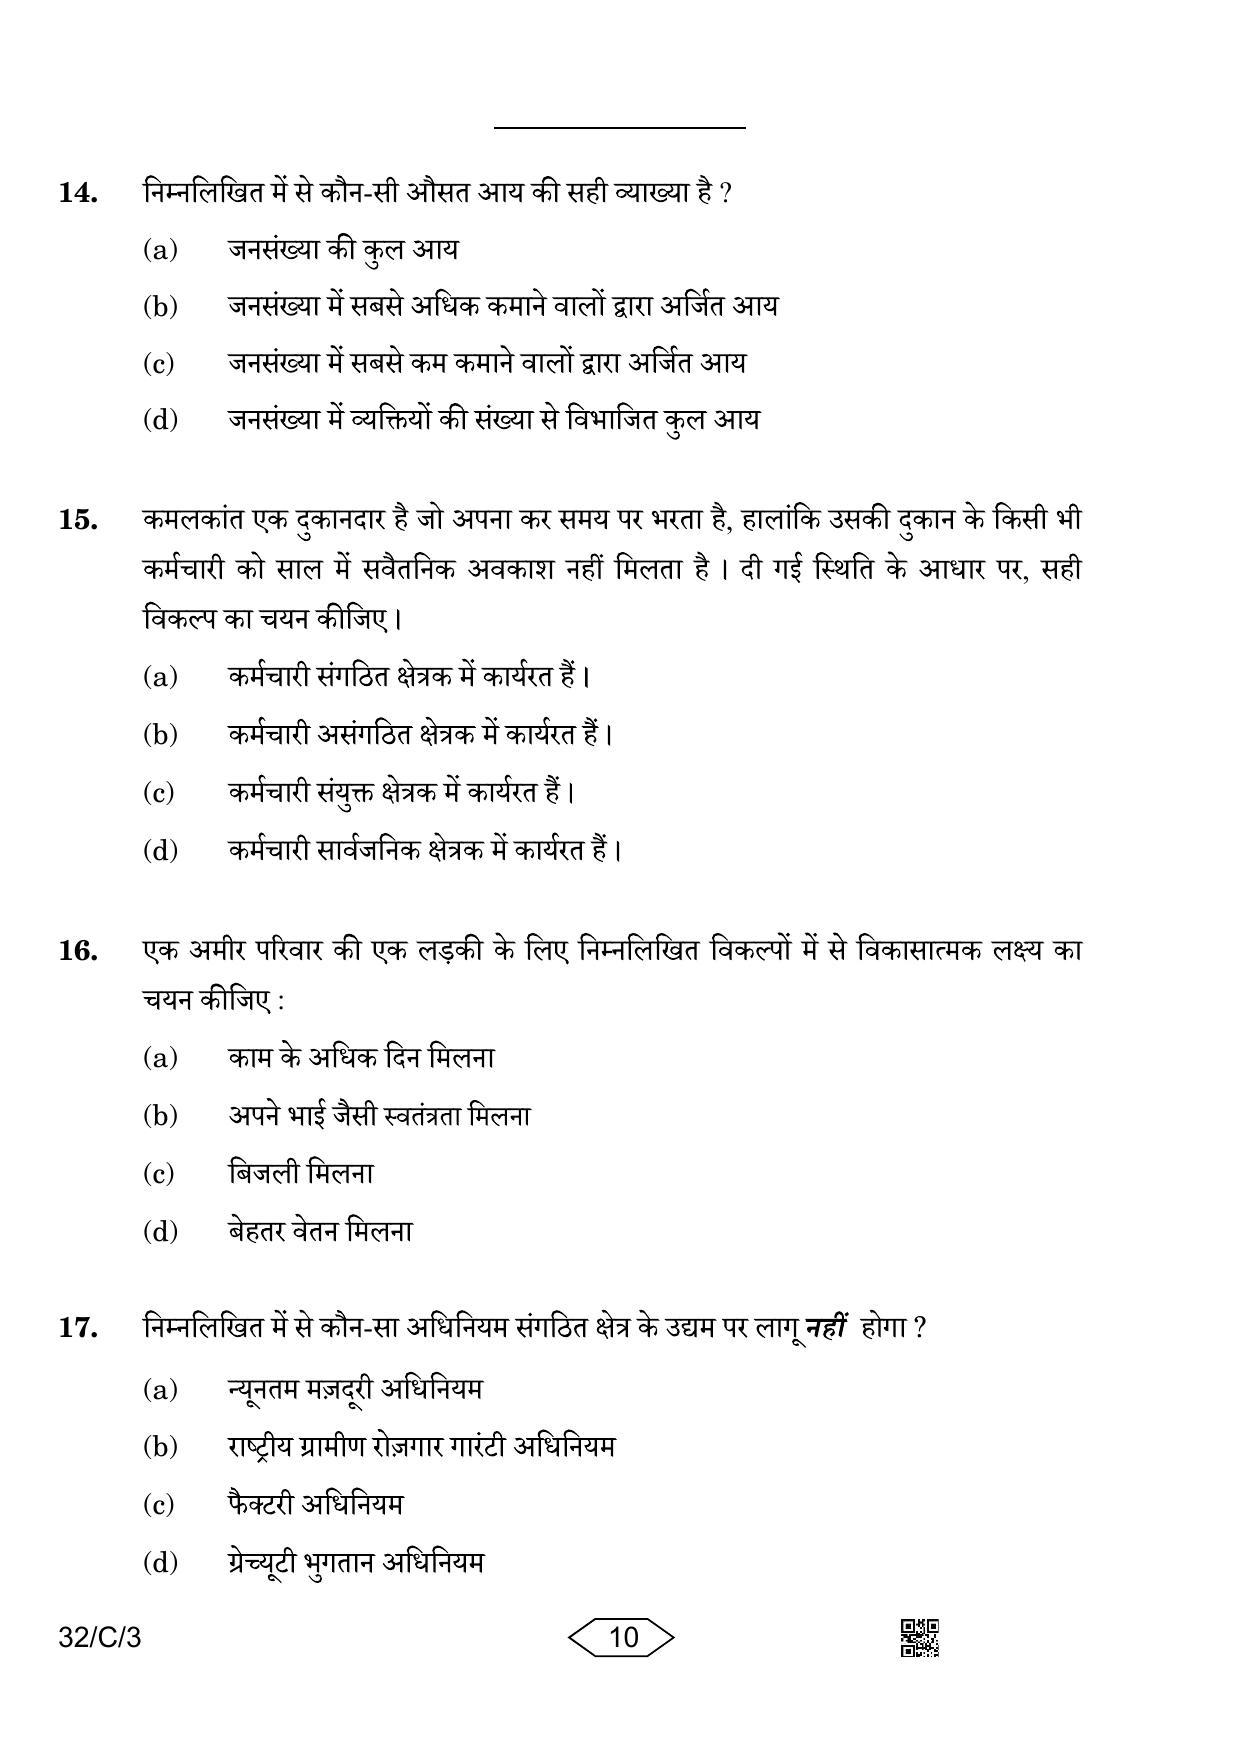 CBSE Class 10 32-3 Social Science 2023 (Compartment) Question Paper - Page 10